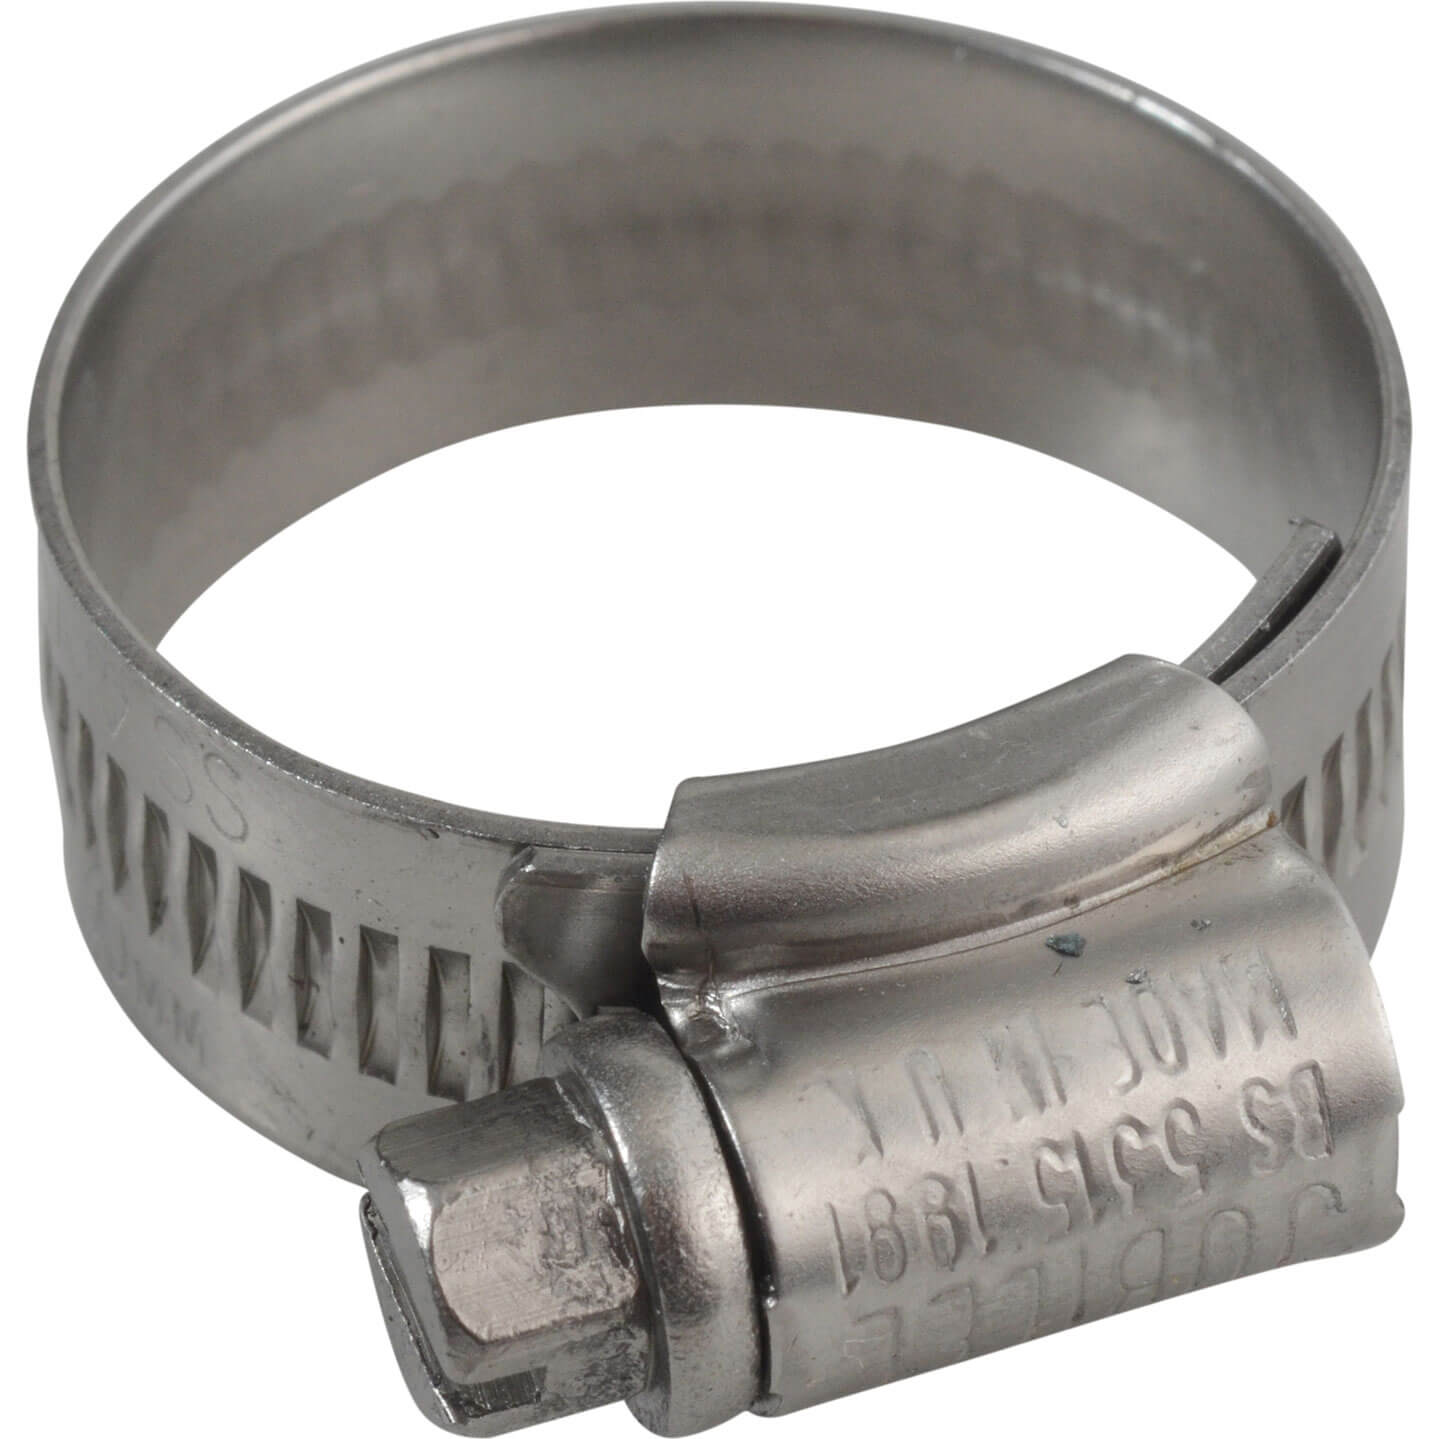 Jubilee 1 Stainless Steel Hose Clip 25 to 35mm (1 to 1 3/8")